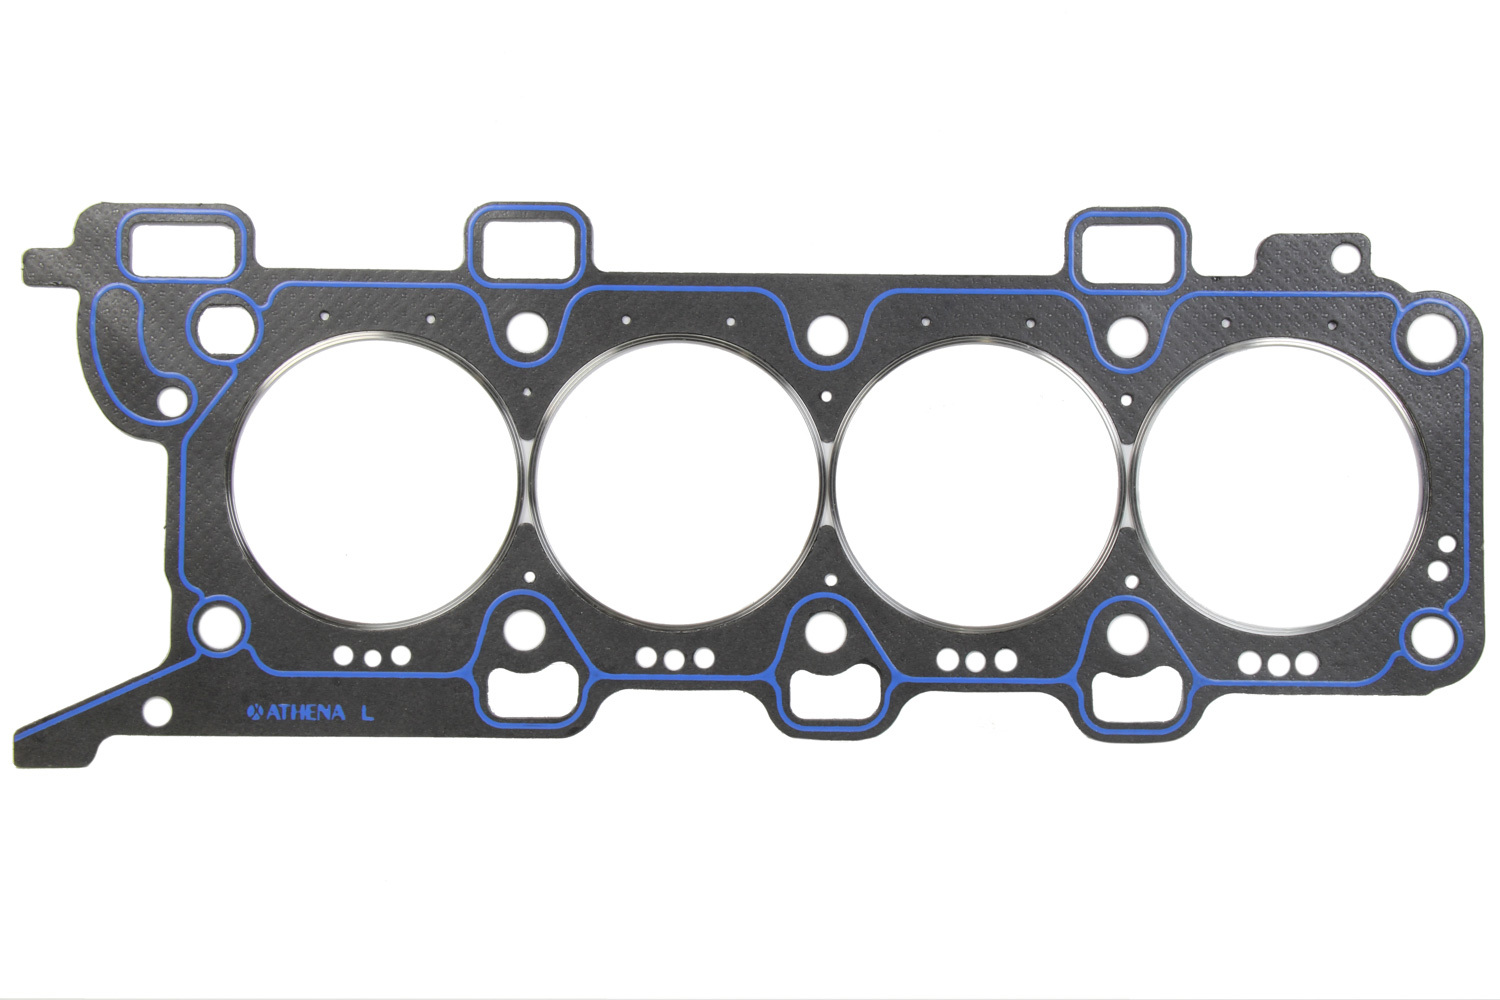 SCE Gaskets CR477139L - Cylinder Head Gasket, Vulcan Cut Ring, 94.4 mm Bore 1.000 mm Compression Thickness, Driver Side, Steel Core Laminate, Each